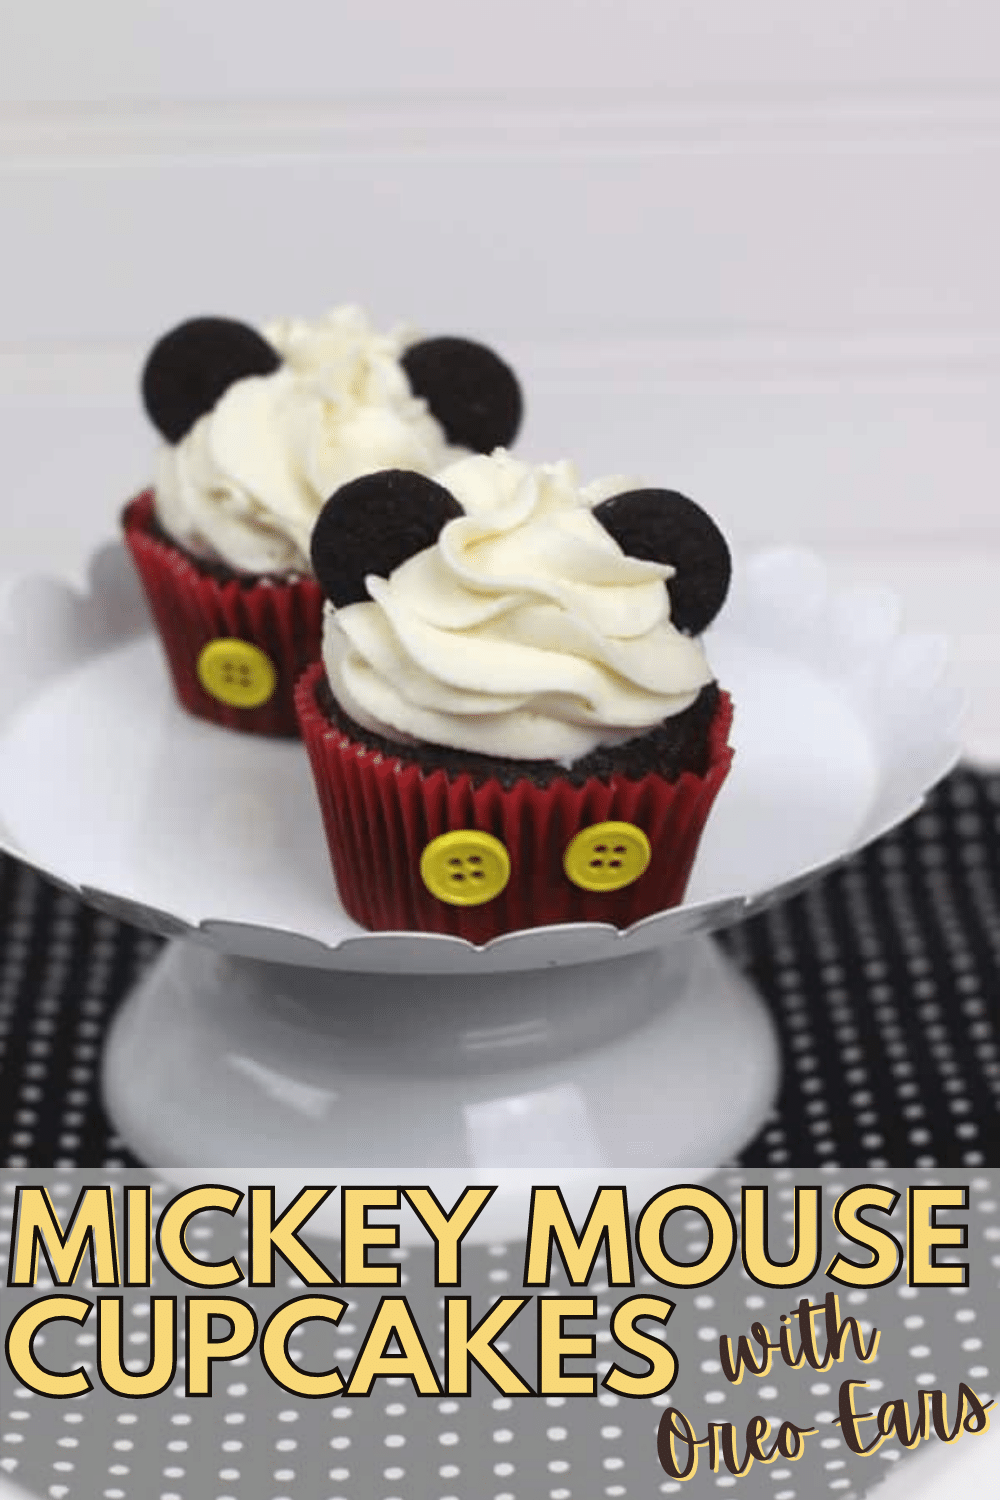 These Mickey Mouse Cupcakes are perfect for any Disney themed party, any get together, or when watching a new Disney release or a favorite classic. They're easy to make and the kids can help! #mickeymouse #cupcakes #disney #party via @wondermomwannab